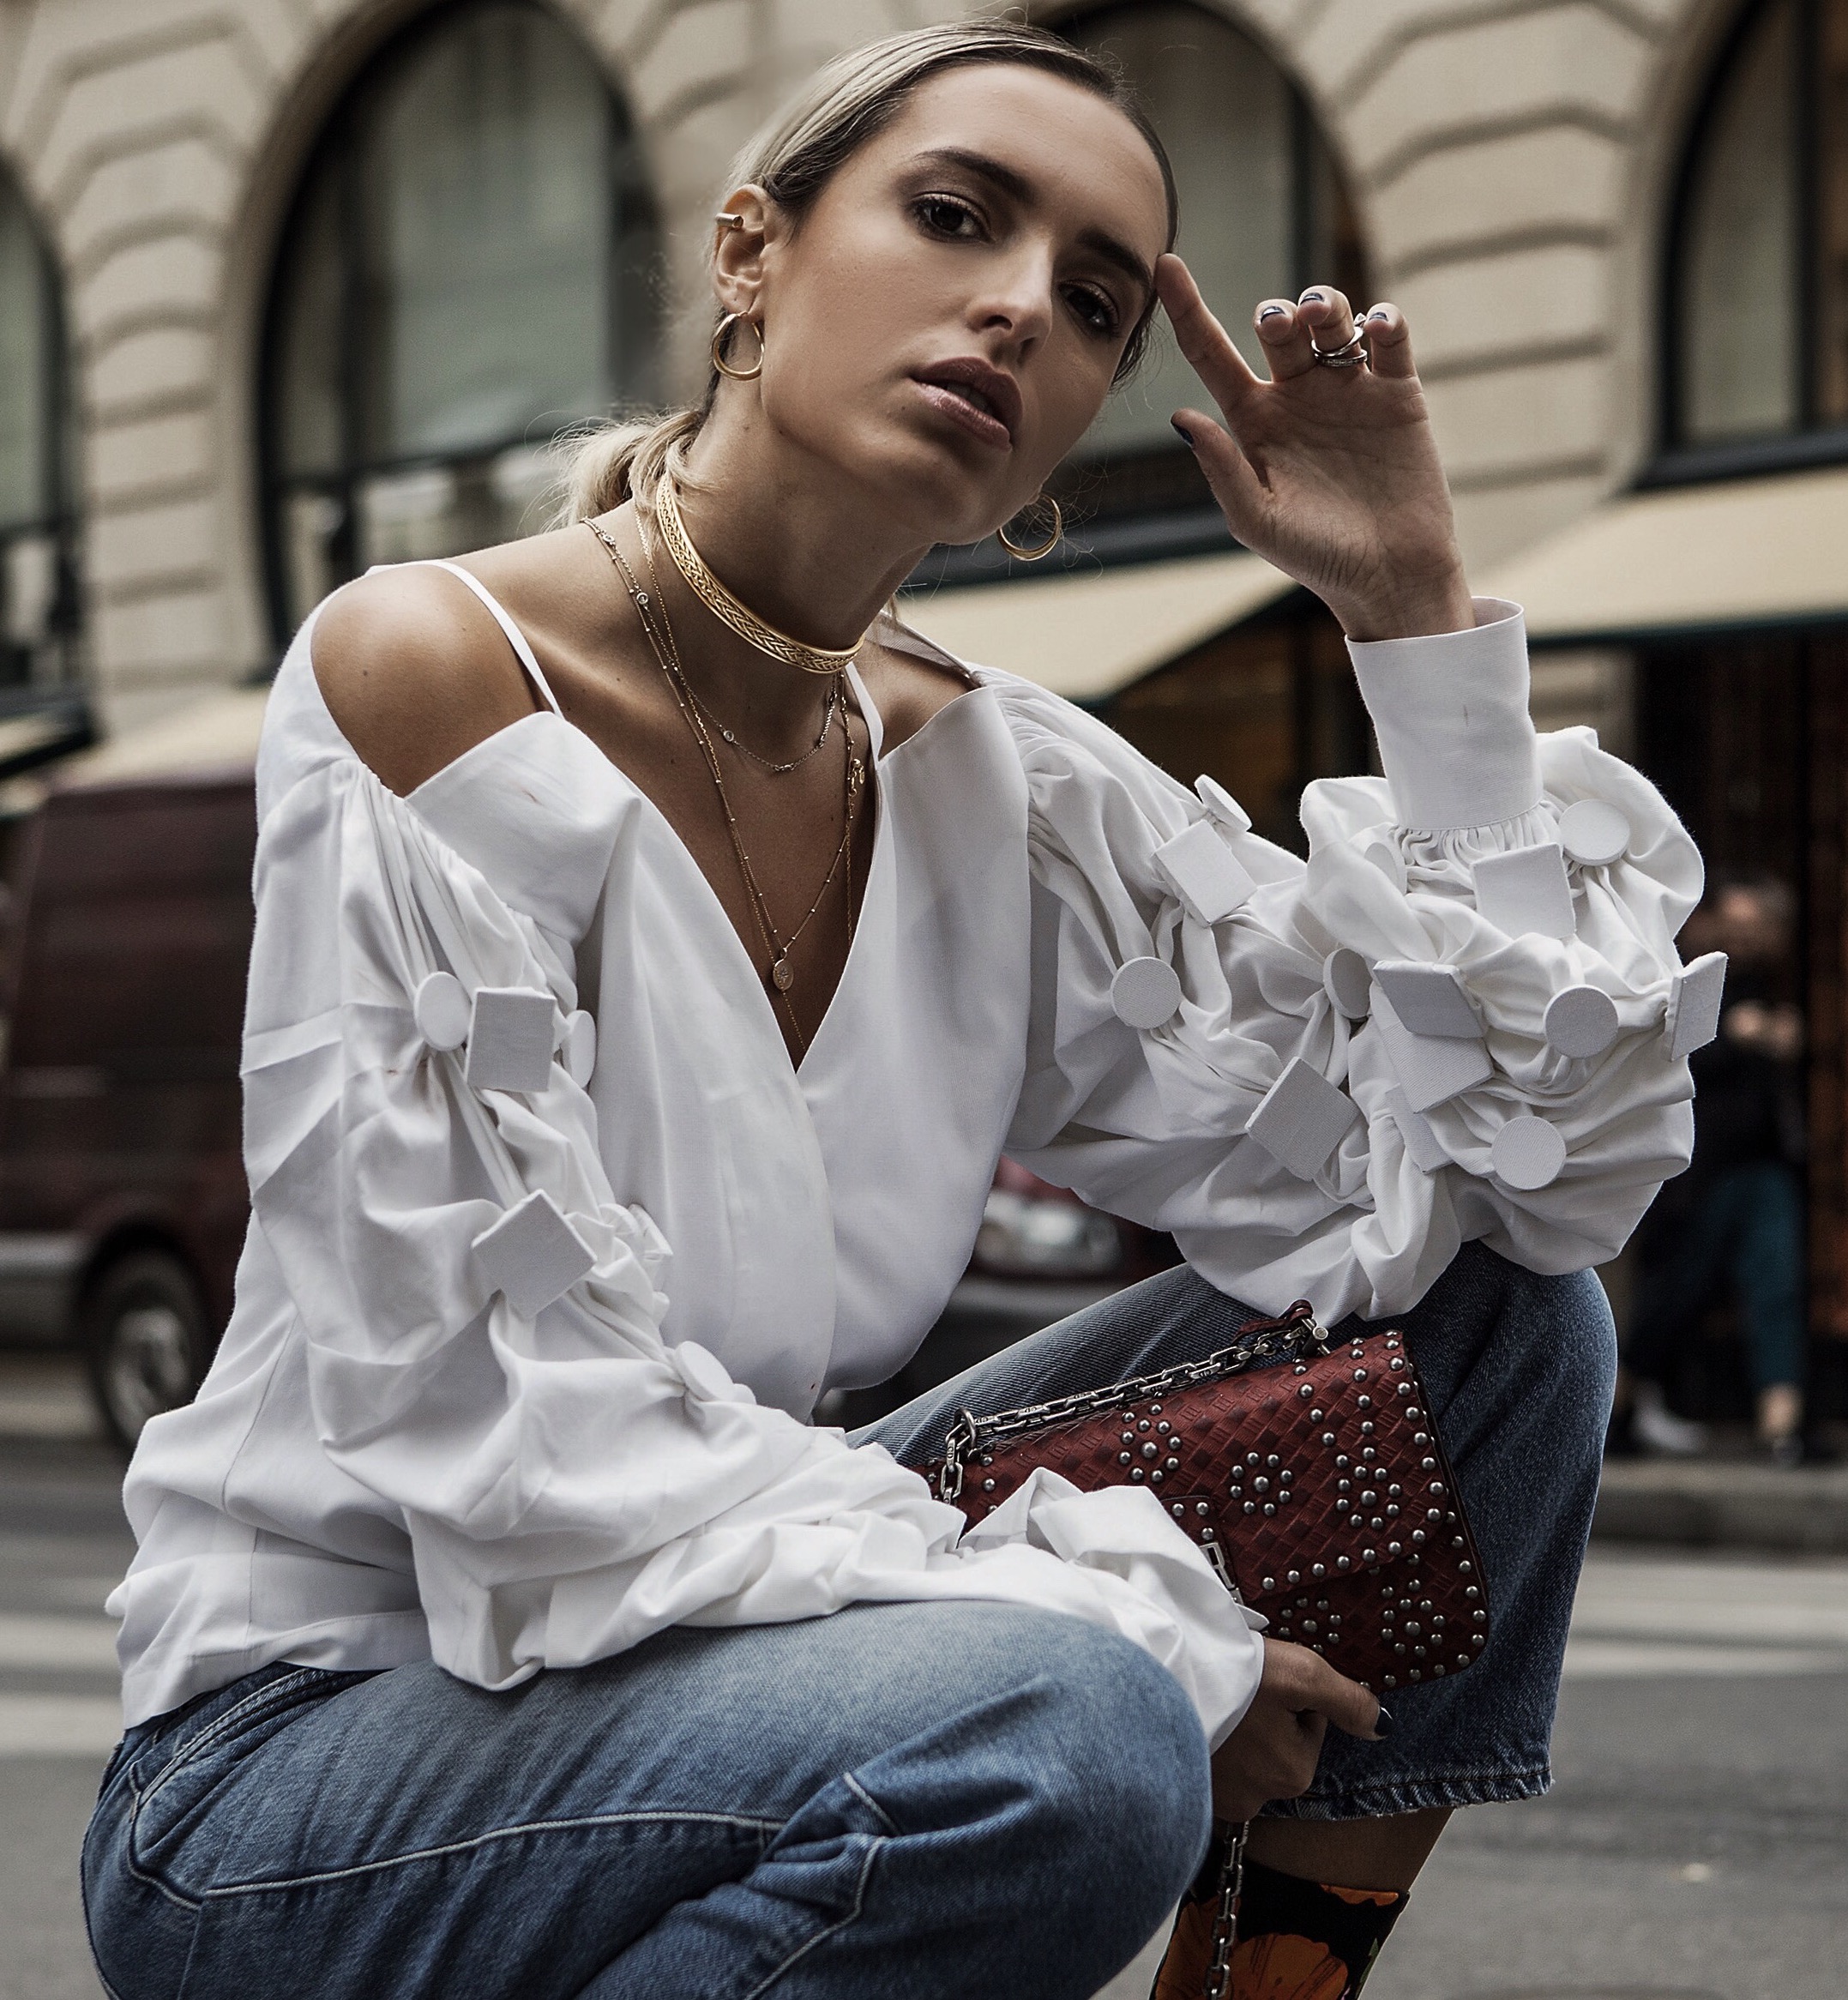 FLOWER HEELED BOOTS - Camila Carril